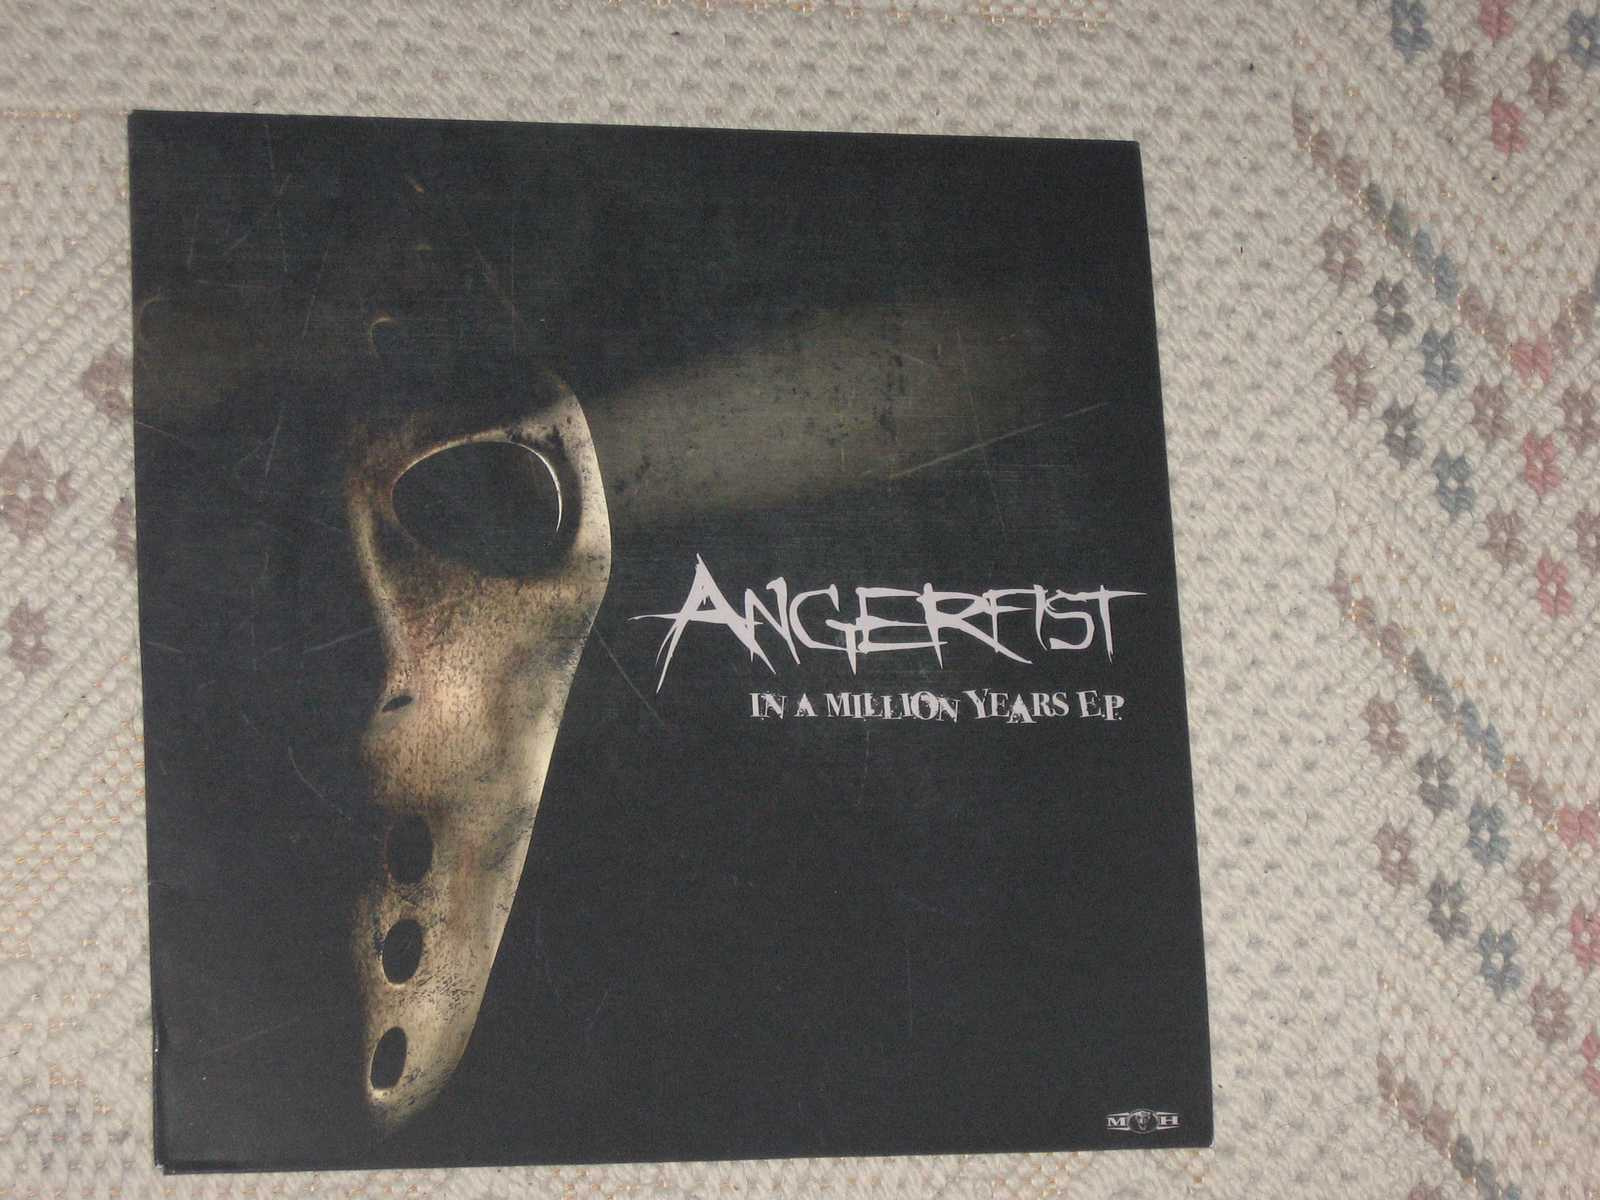 (MOH071) Angerfist - In A Million Years (front)